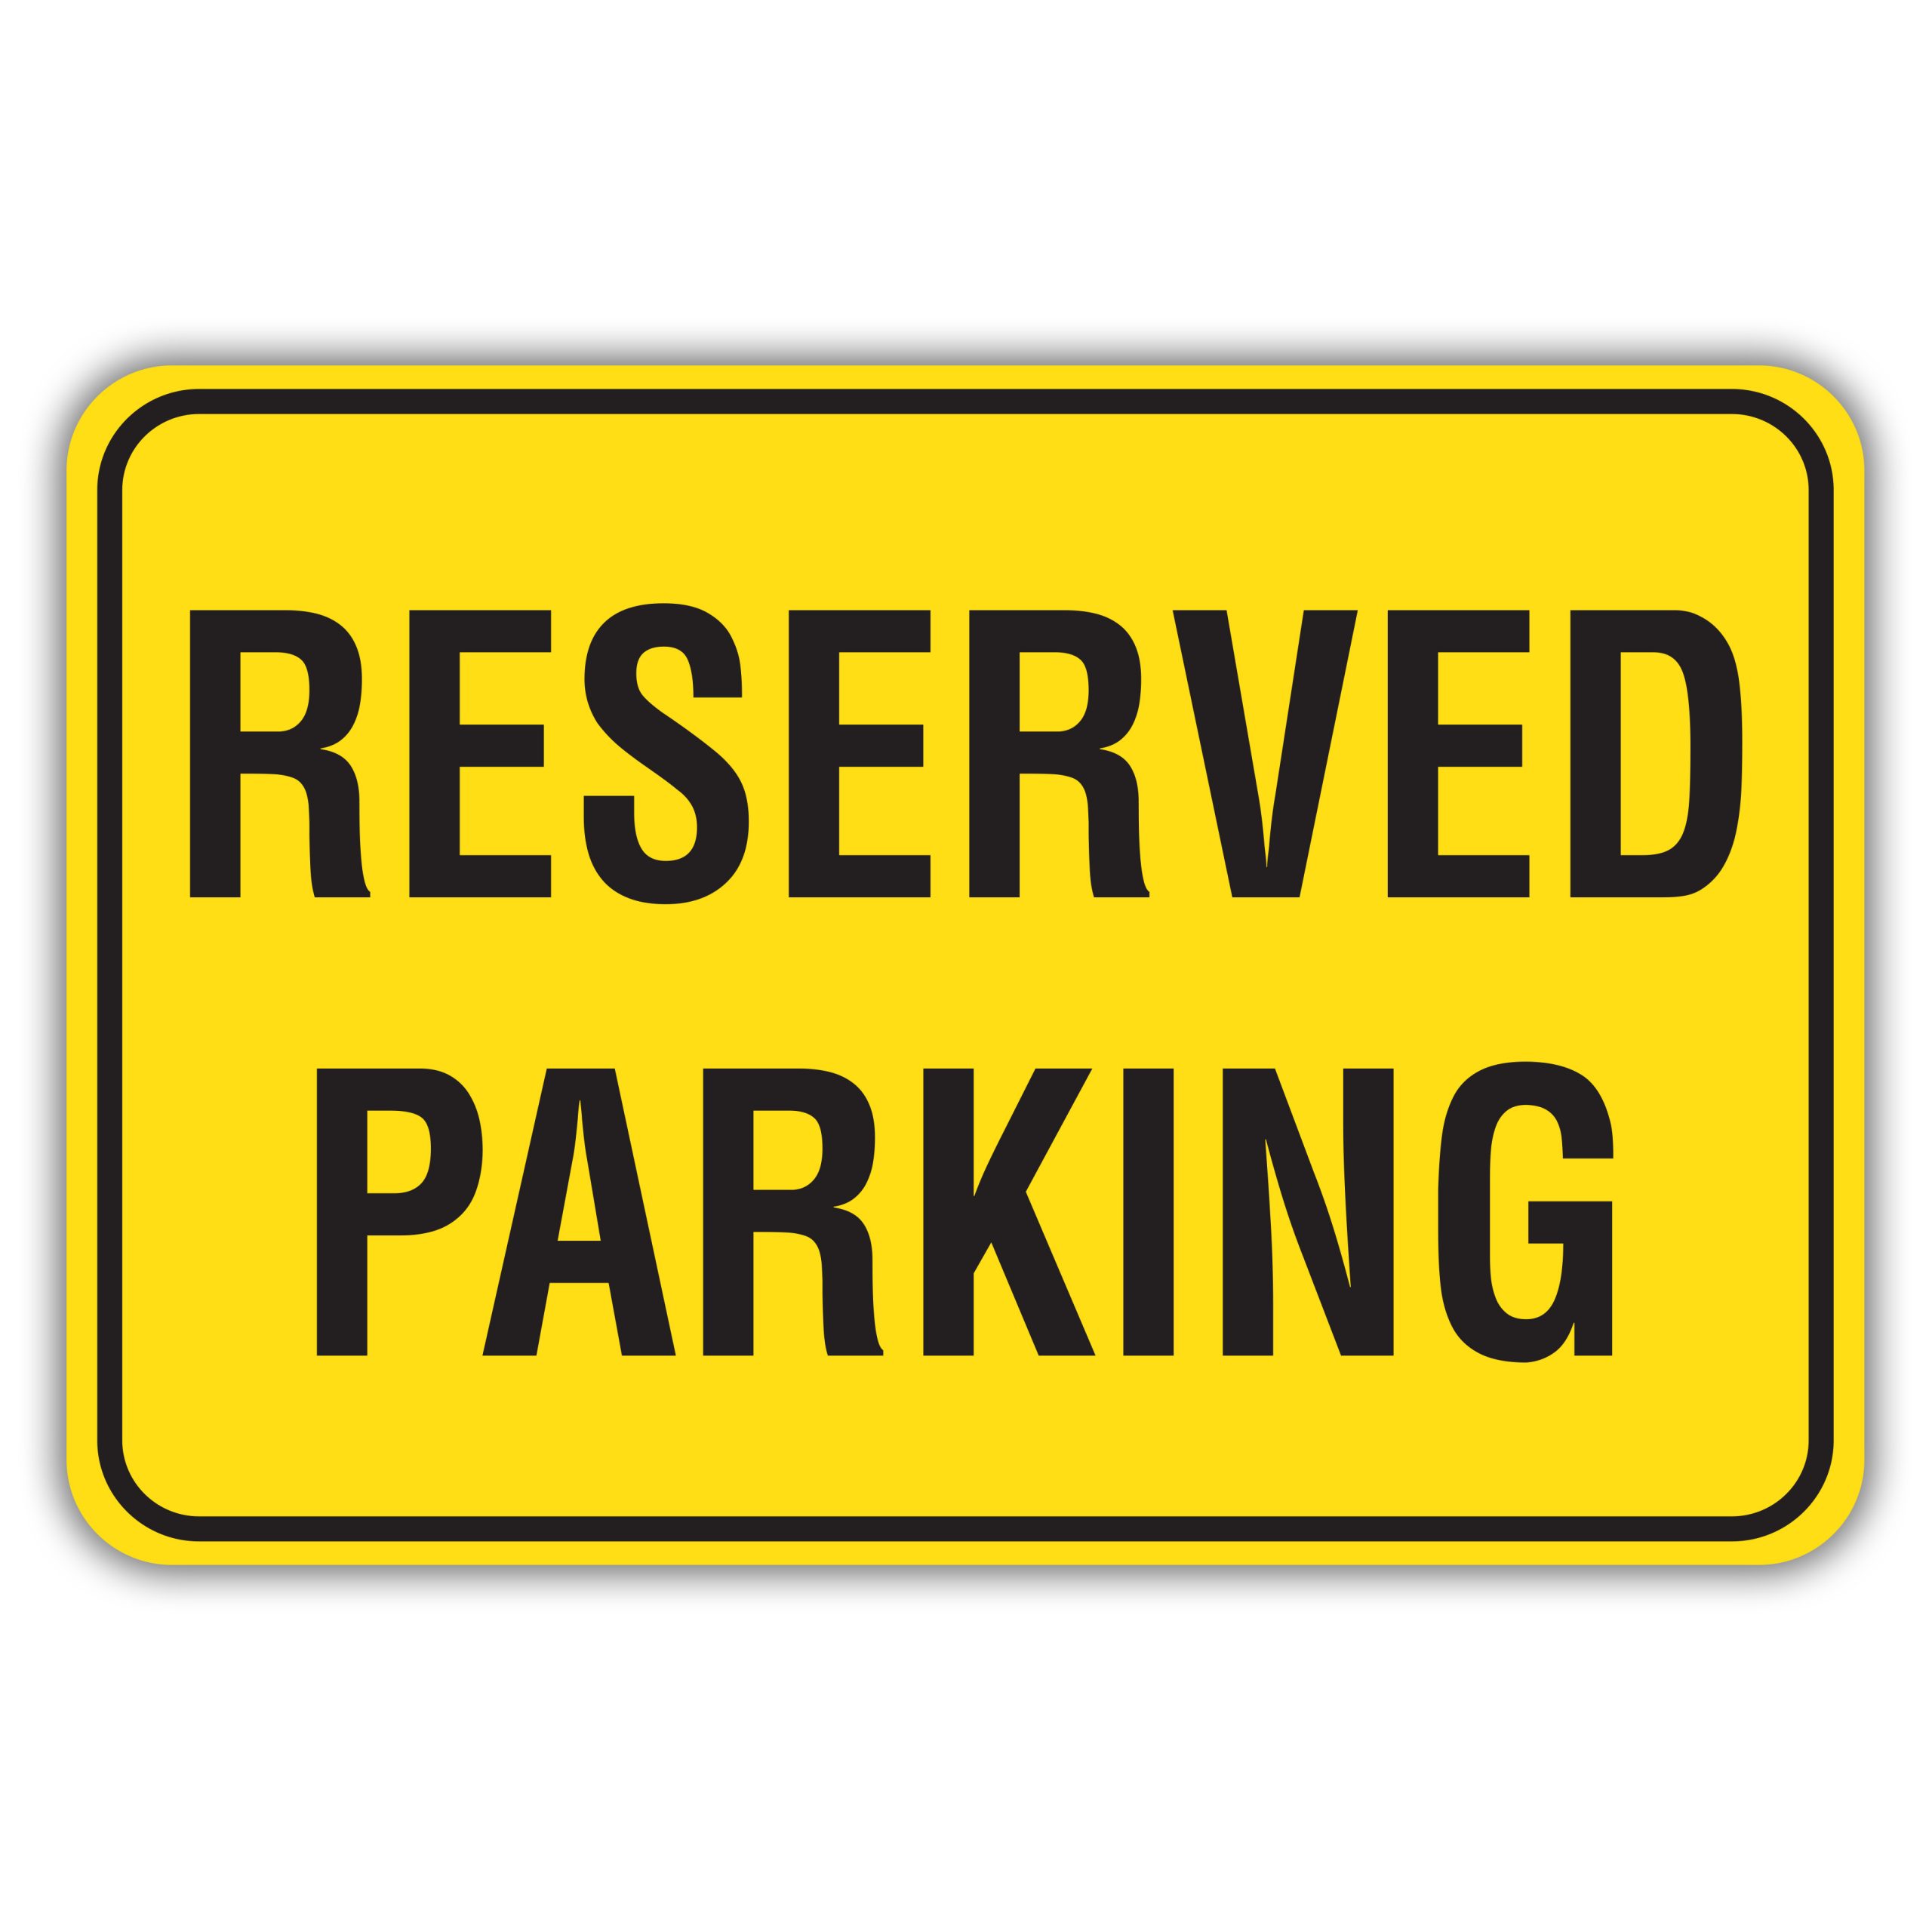 Reserved Parking Employee of The Month Black Yellow Print Car Parking Lot Business Outdoor Sign Large 12x18 Alumin 